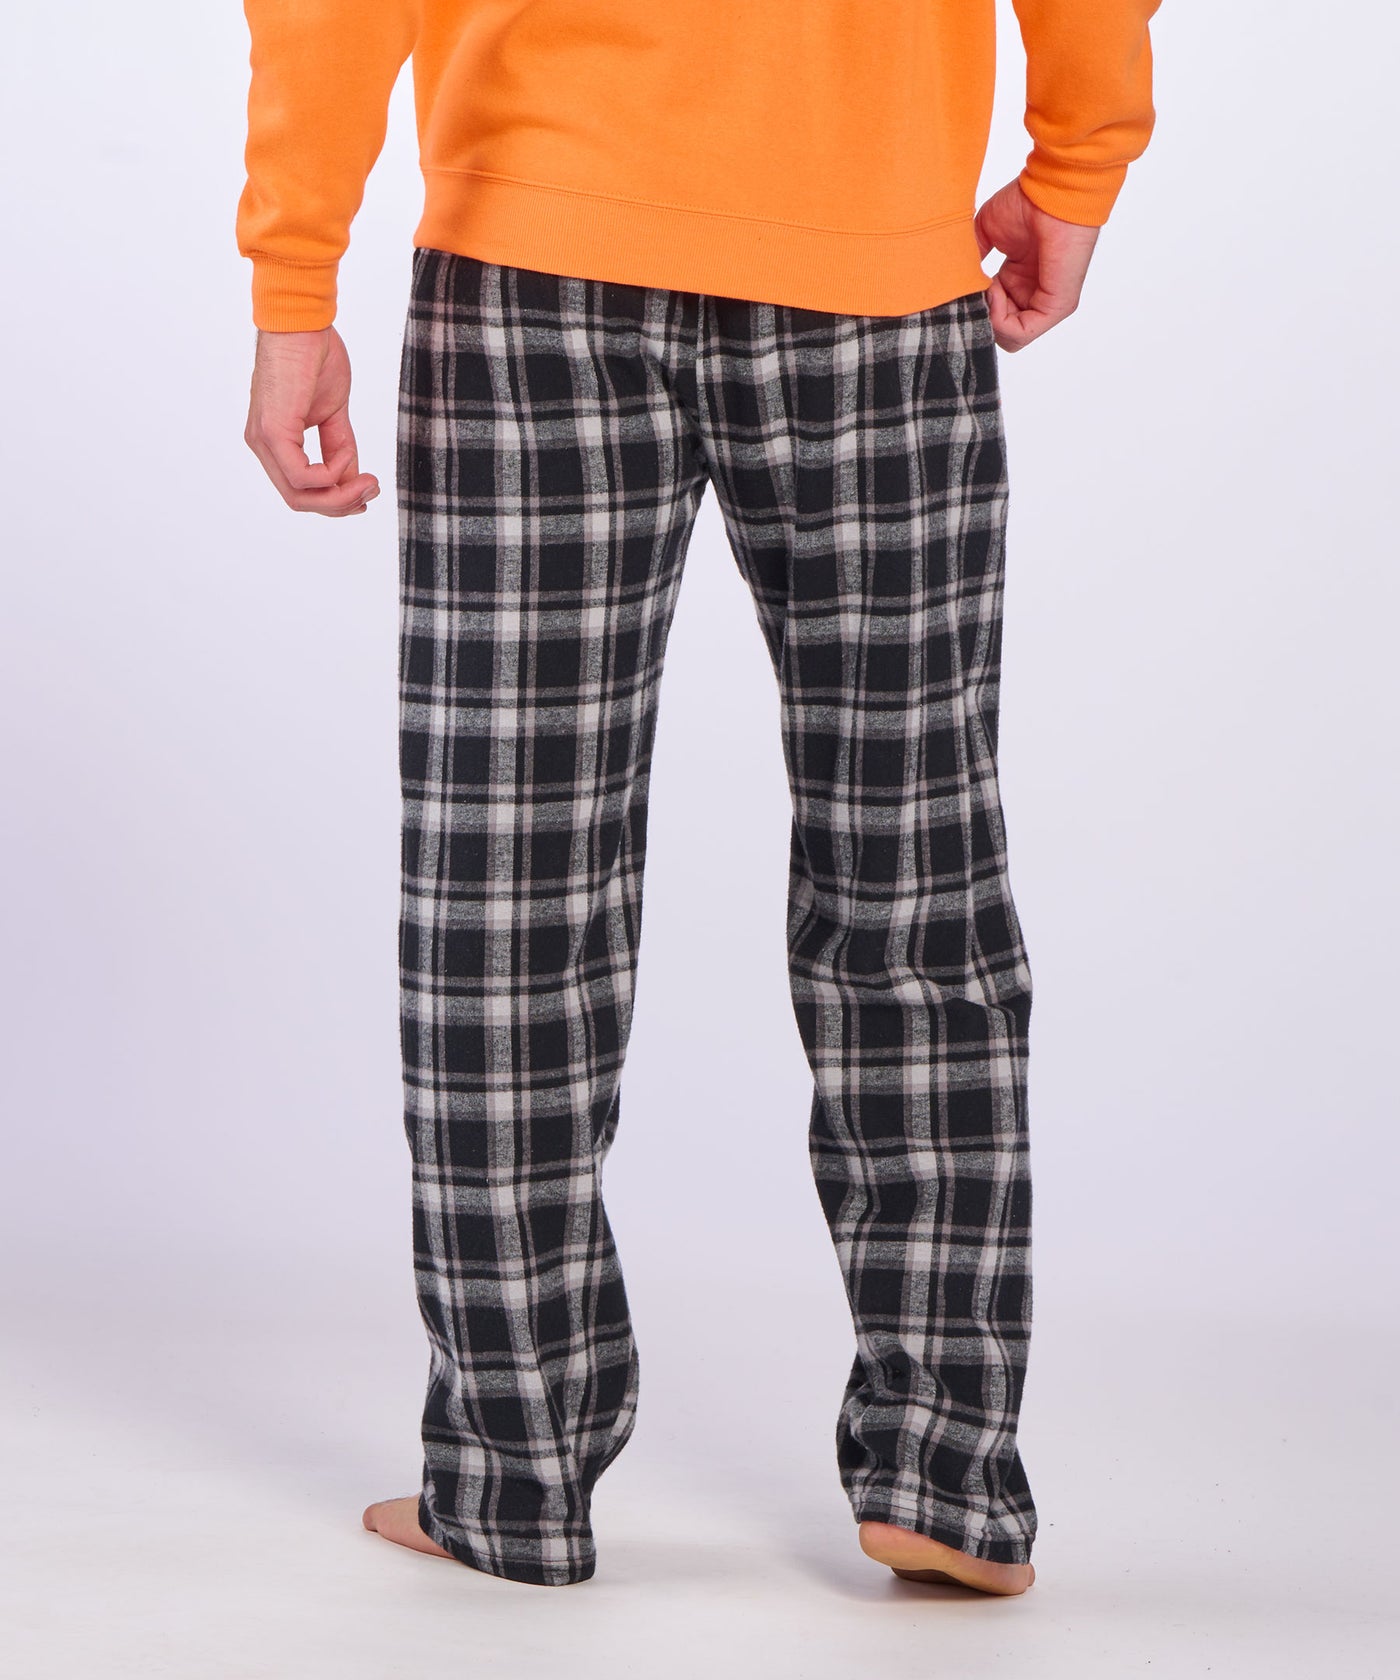 Gray Flannel Pants | Peter Christian